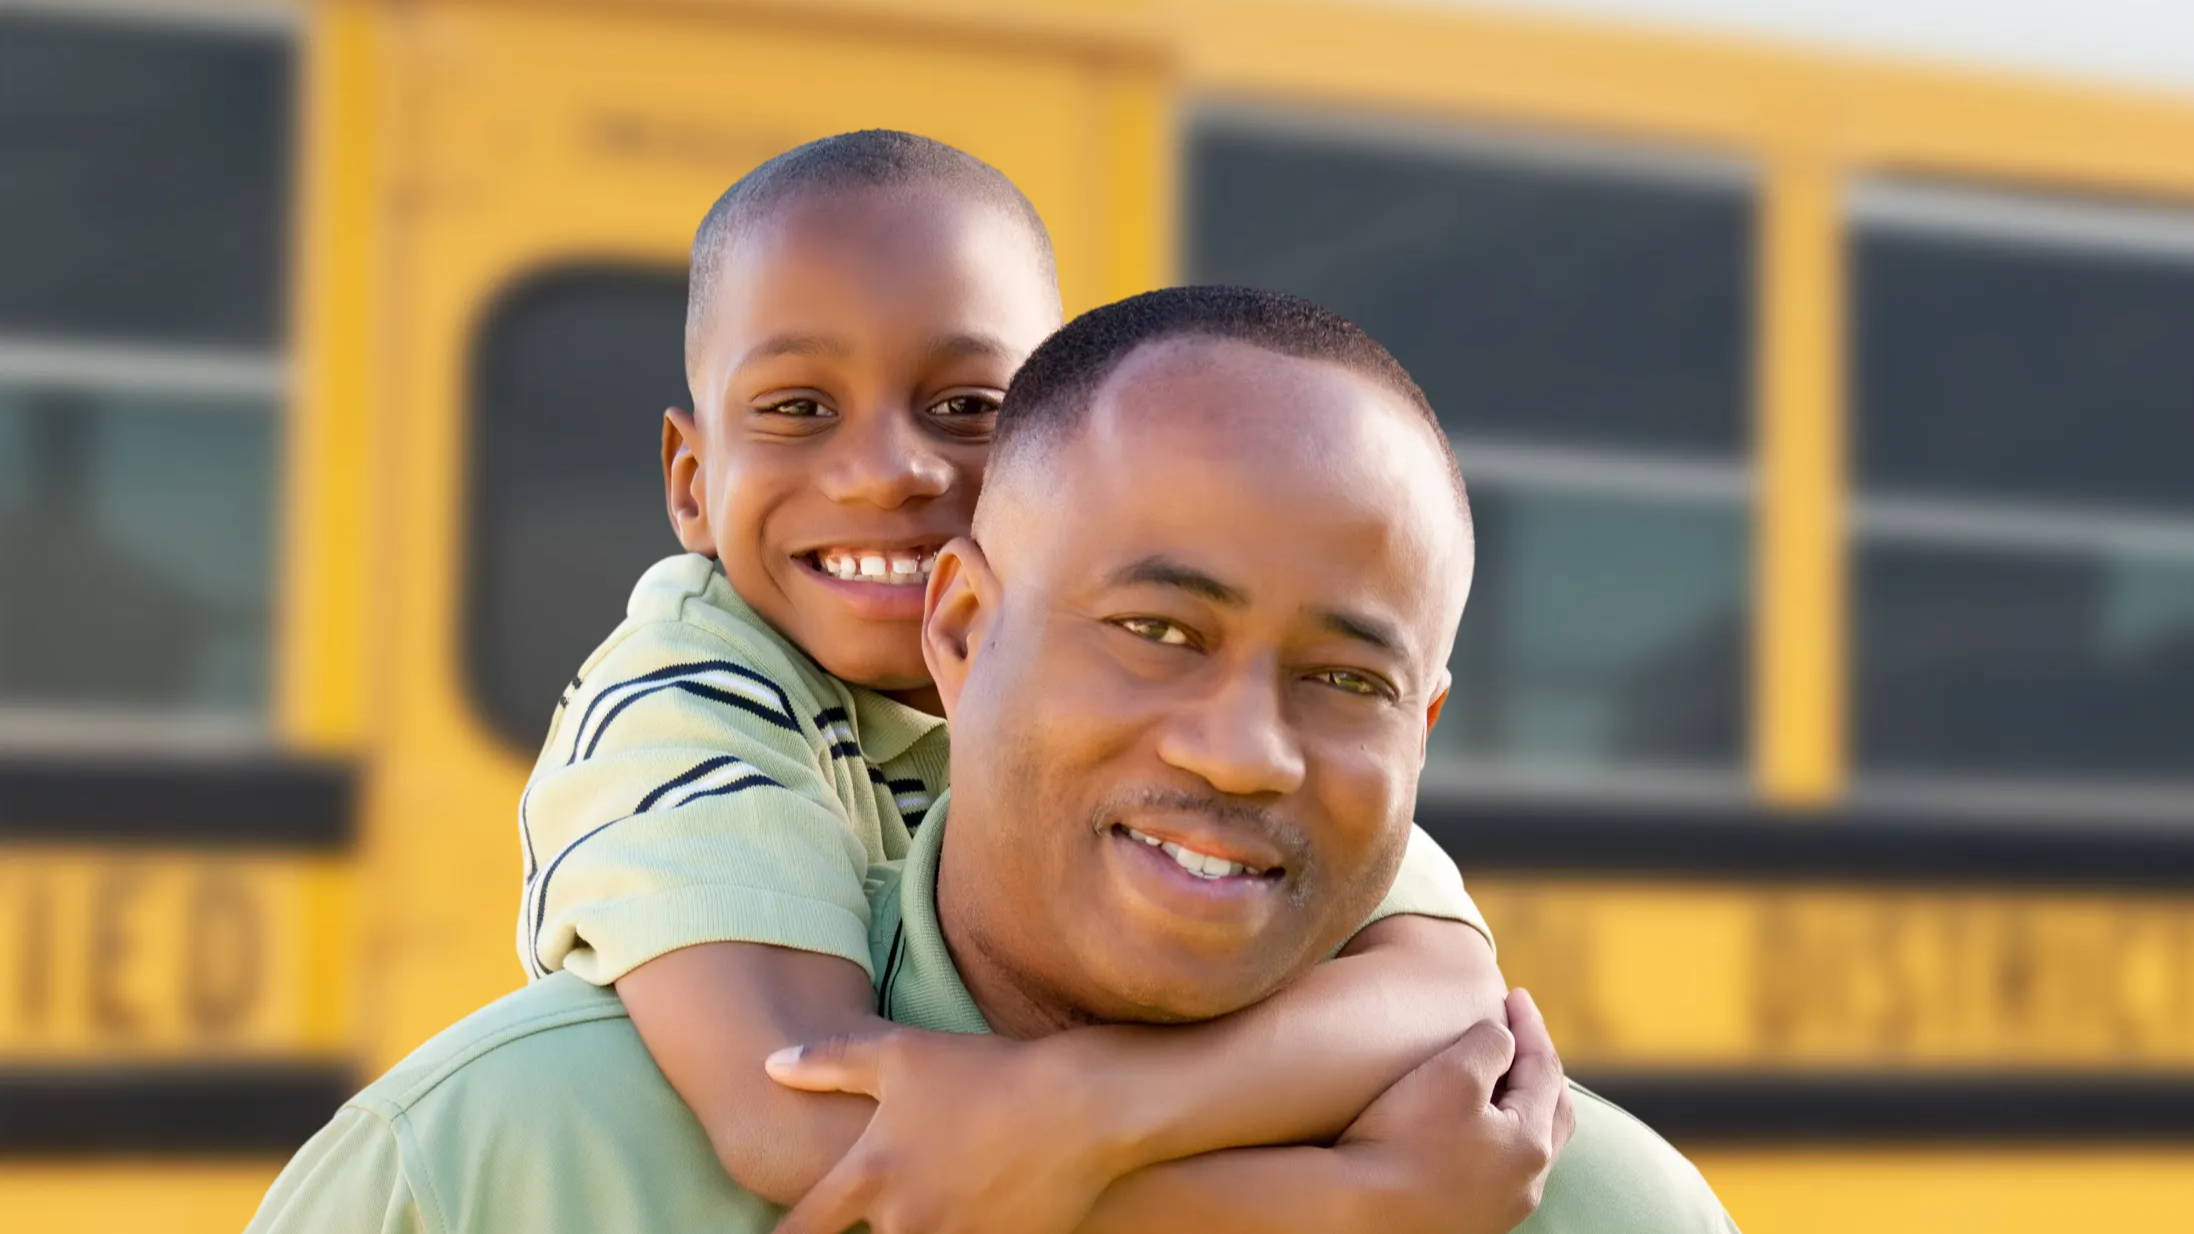 Dad and son hugging by school bus